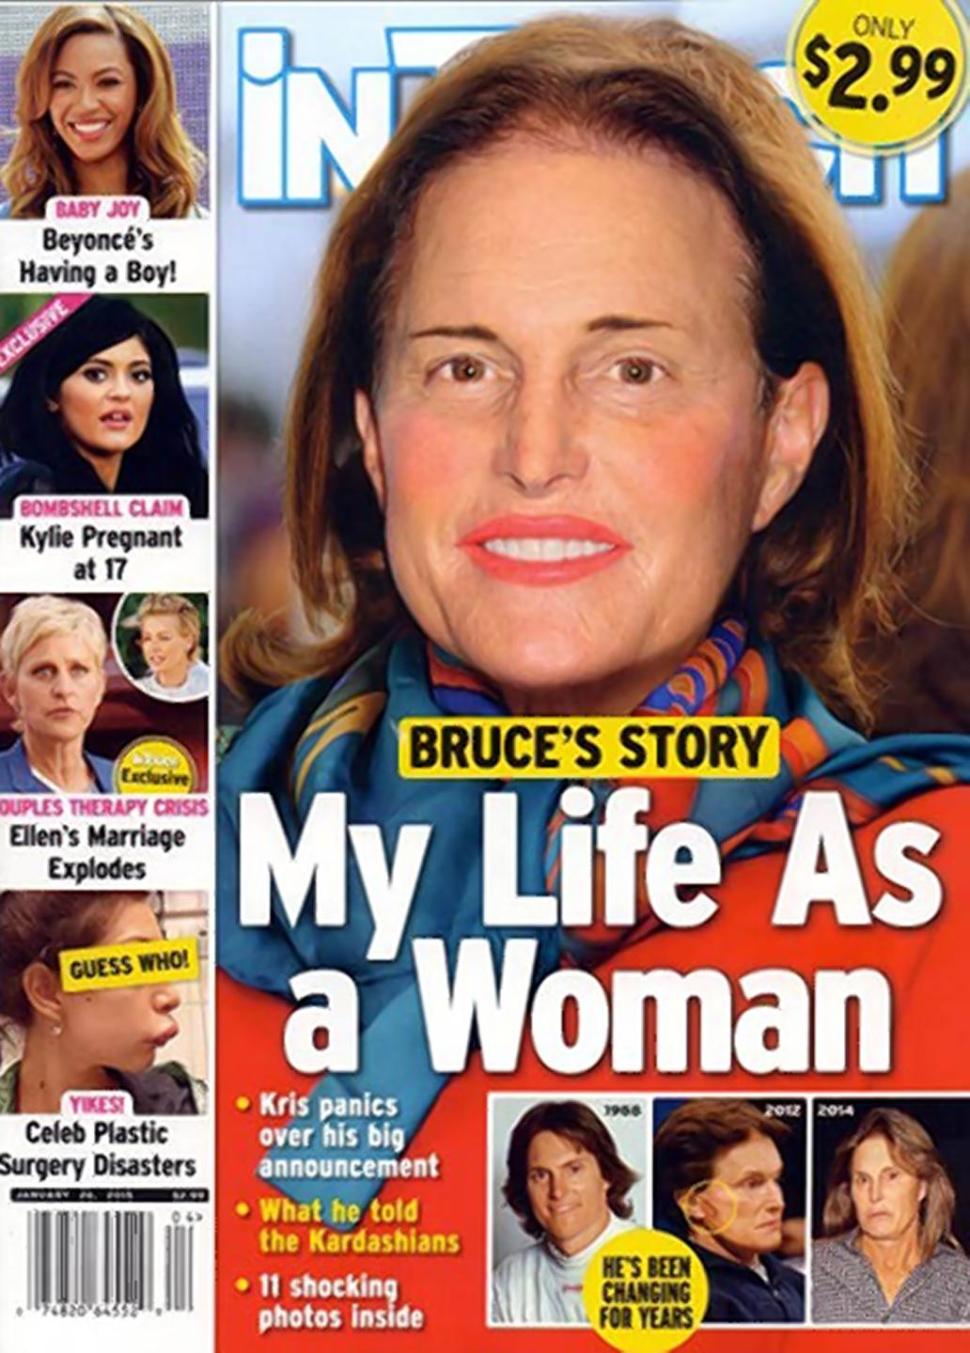 InTouch Weekly's Bruce Jenner cover was outrageously doctored.